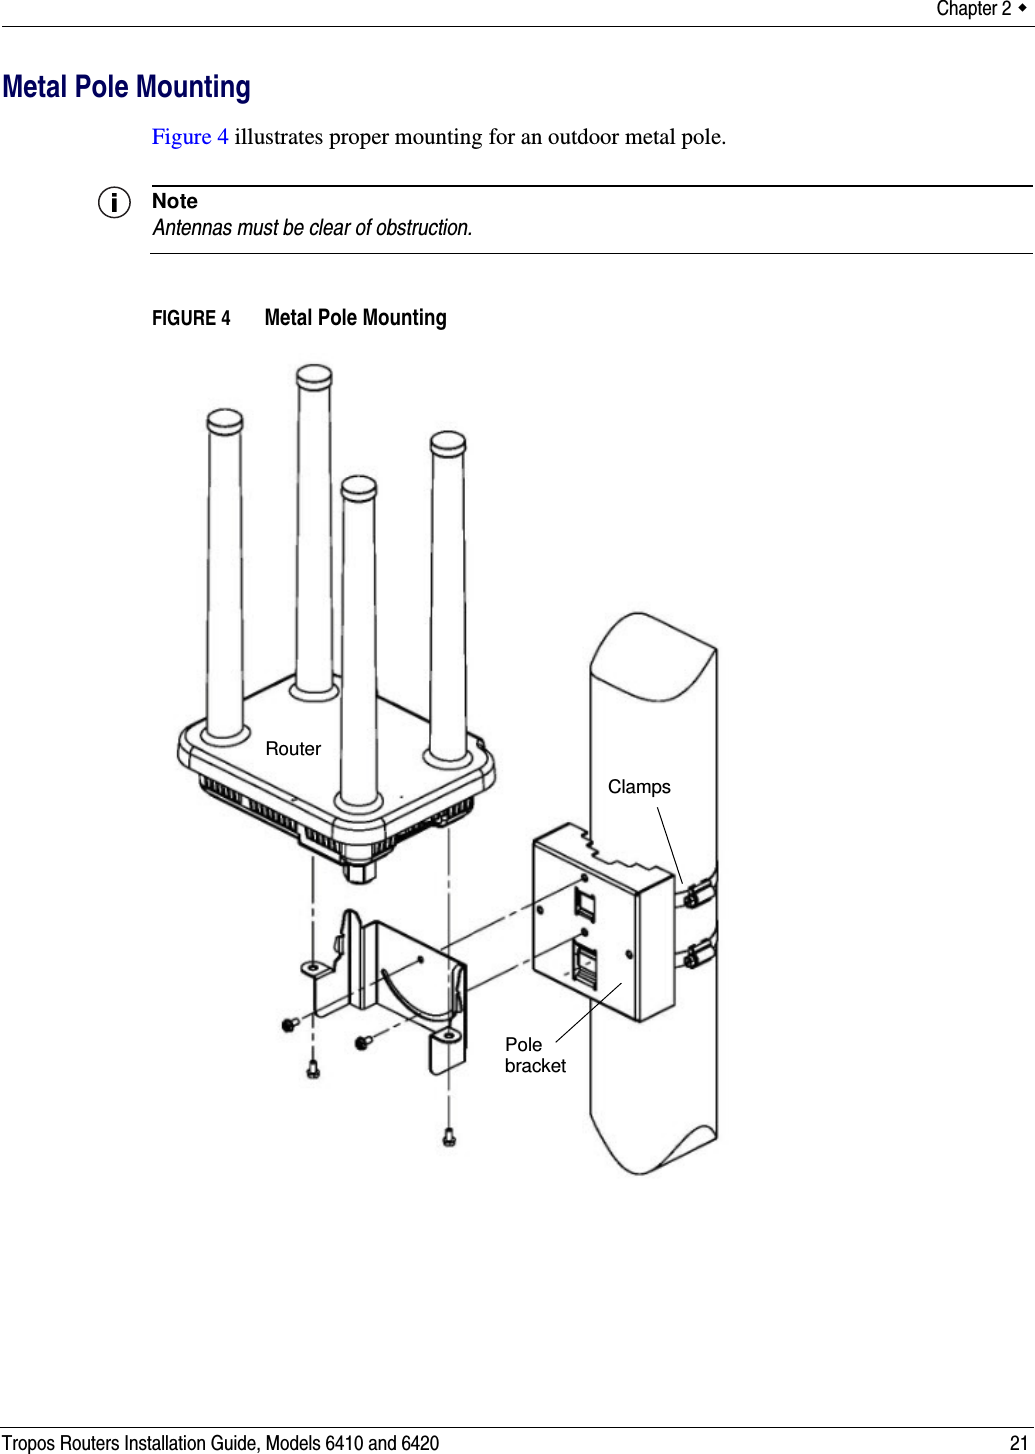 Chapter 2  Tropos Routers Installation Guide, Models 6410 and 6420 21Metal Pole MountingFigure 4 illustrates proper mounting for an outdoor metal pole. NoteAntennas must be clear of obstruction.FIGURE 4   Metal Pole MountingClampsPole bracketRouter